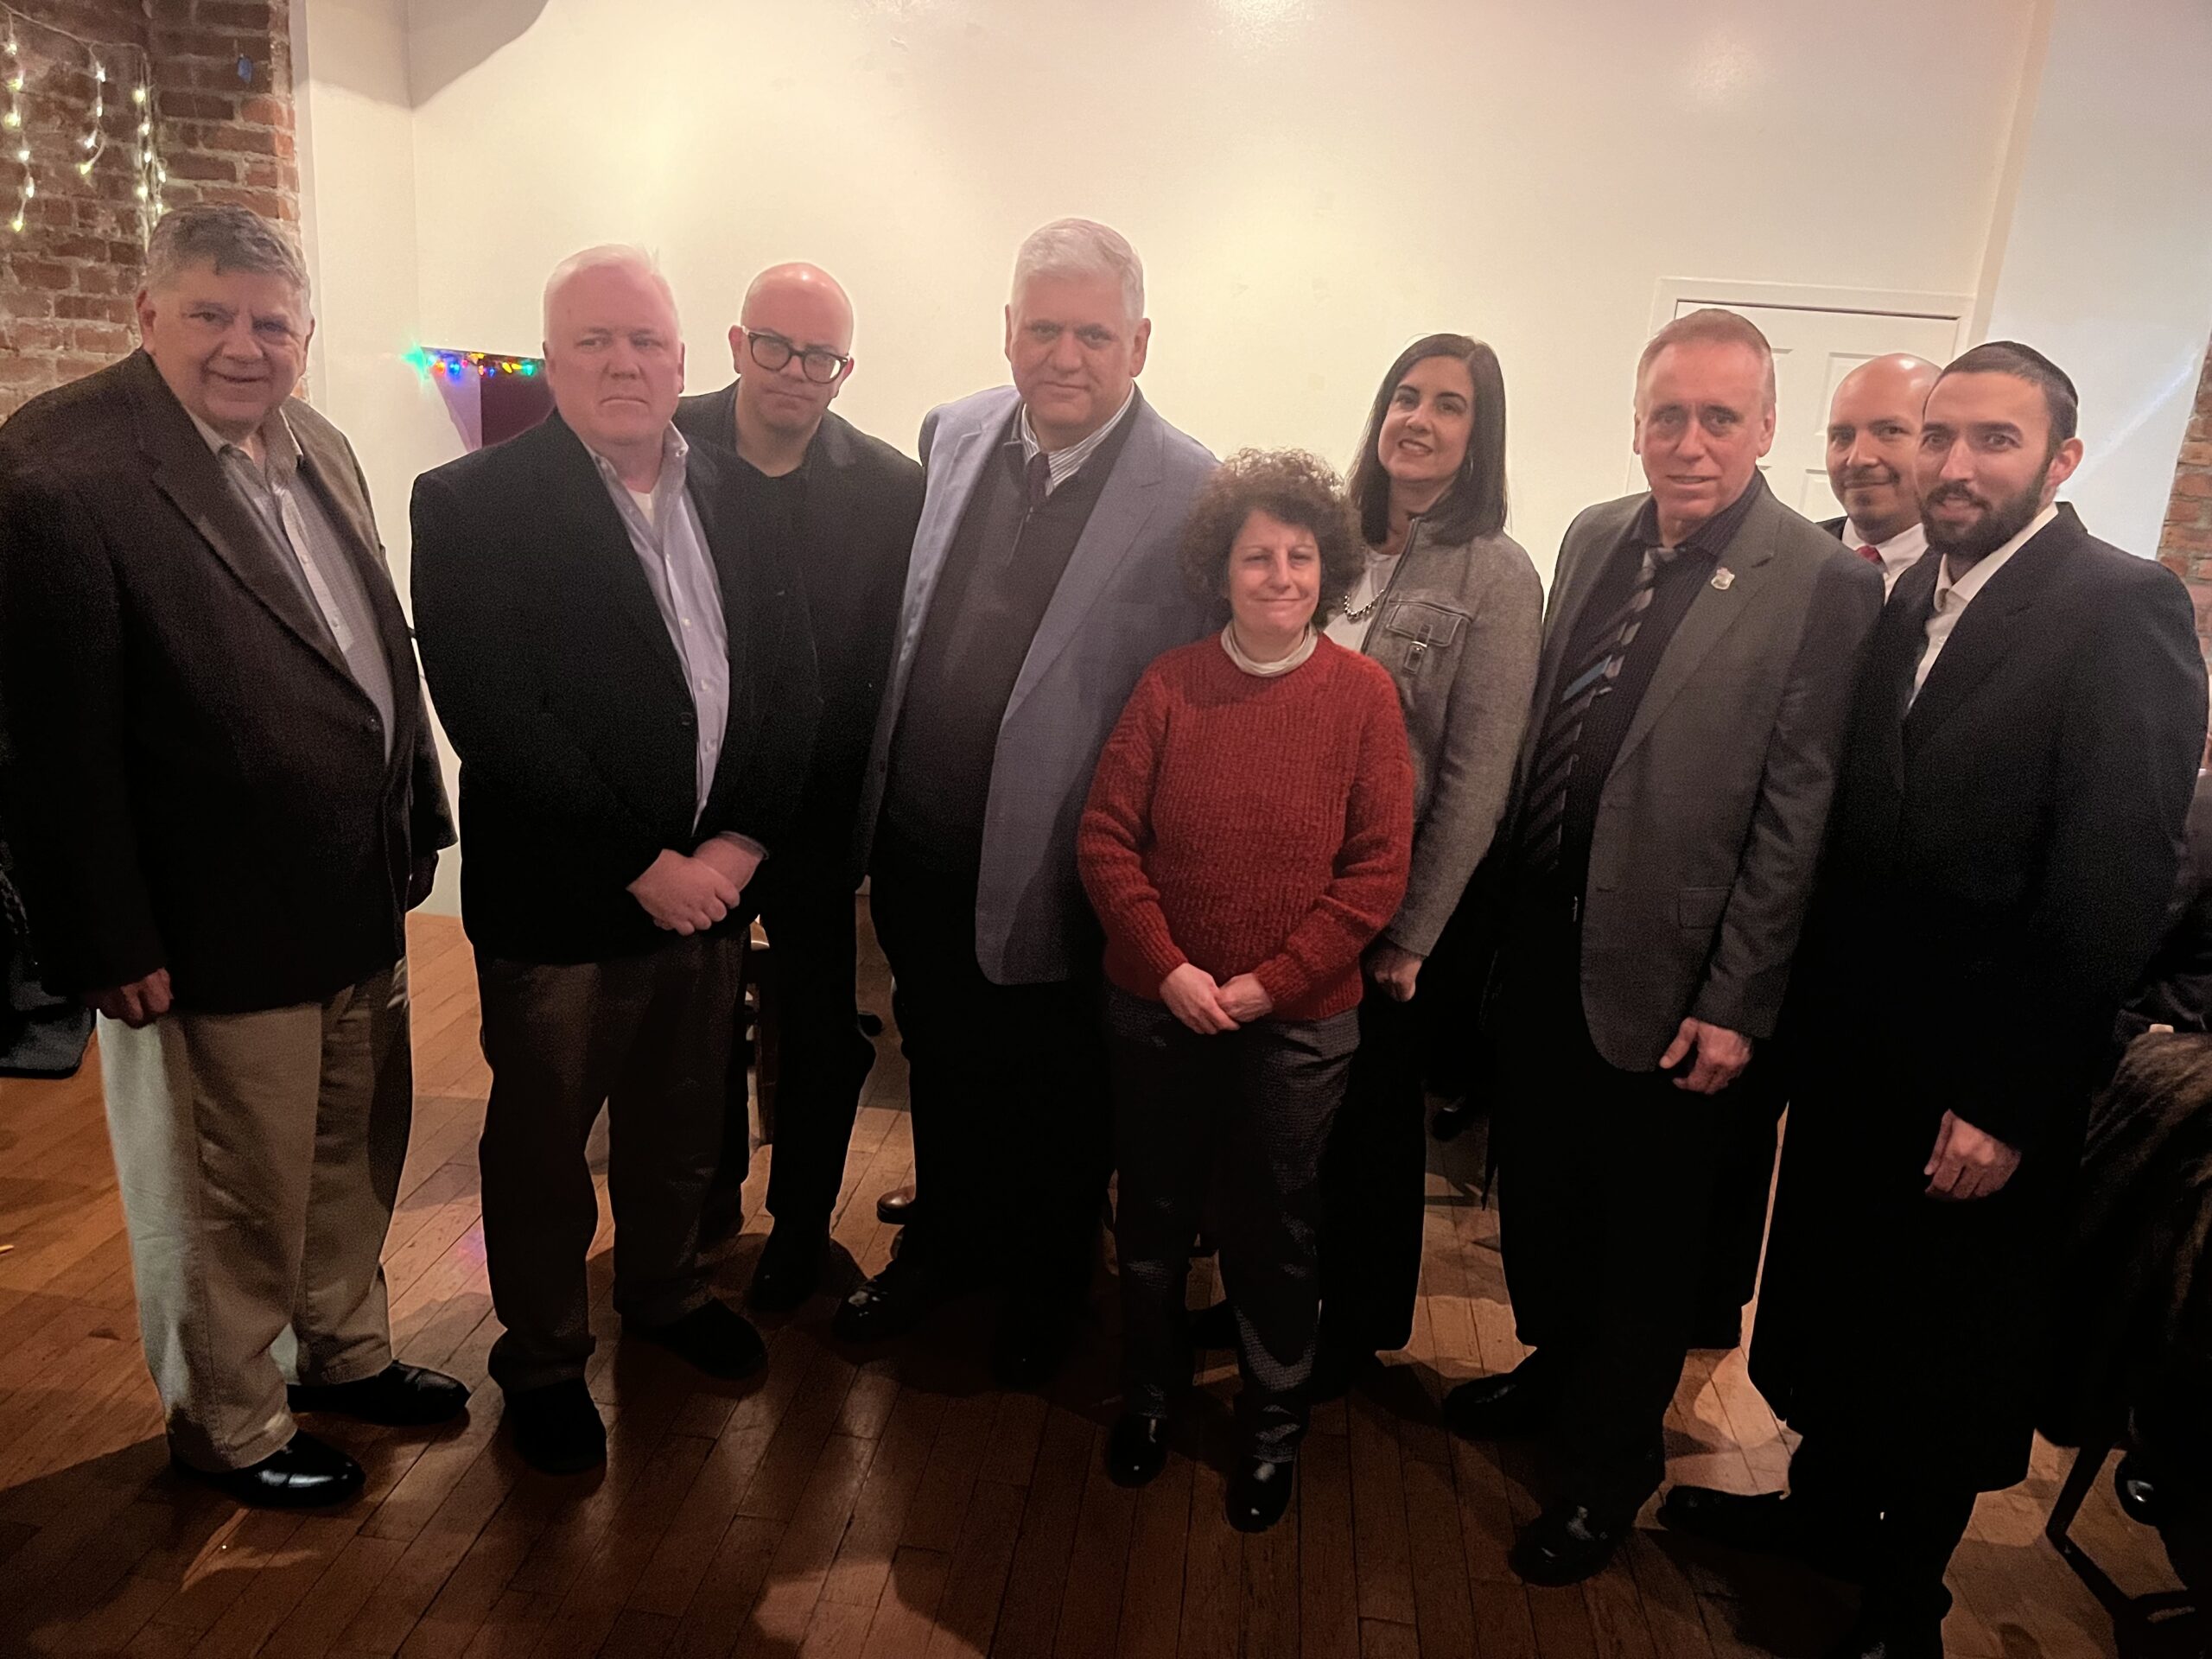 From left: Jerry Kassar, chair, New York State Conservative Party; David Ryan, vice chair, Kings County Conservative Party; David Curcio, chair, Staten Island Conservative Party; Richie Barsamian, chair, Kings County Republican Party; Fran Vella-Marrone, chair, Kings County Conservative Party; U.S. Rep. Nicole Malliotakis, R-11th; John Petrullo, from Police Organization Providing Peer Assistance (POPPA); Detective Luis Lopez (POPPA), and Assemblyman Simcha Eichenstein, D-48th.Photos: Wayne Schneiderman/Brooklyn Reporter